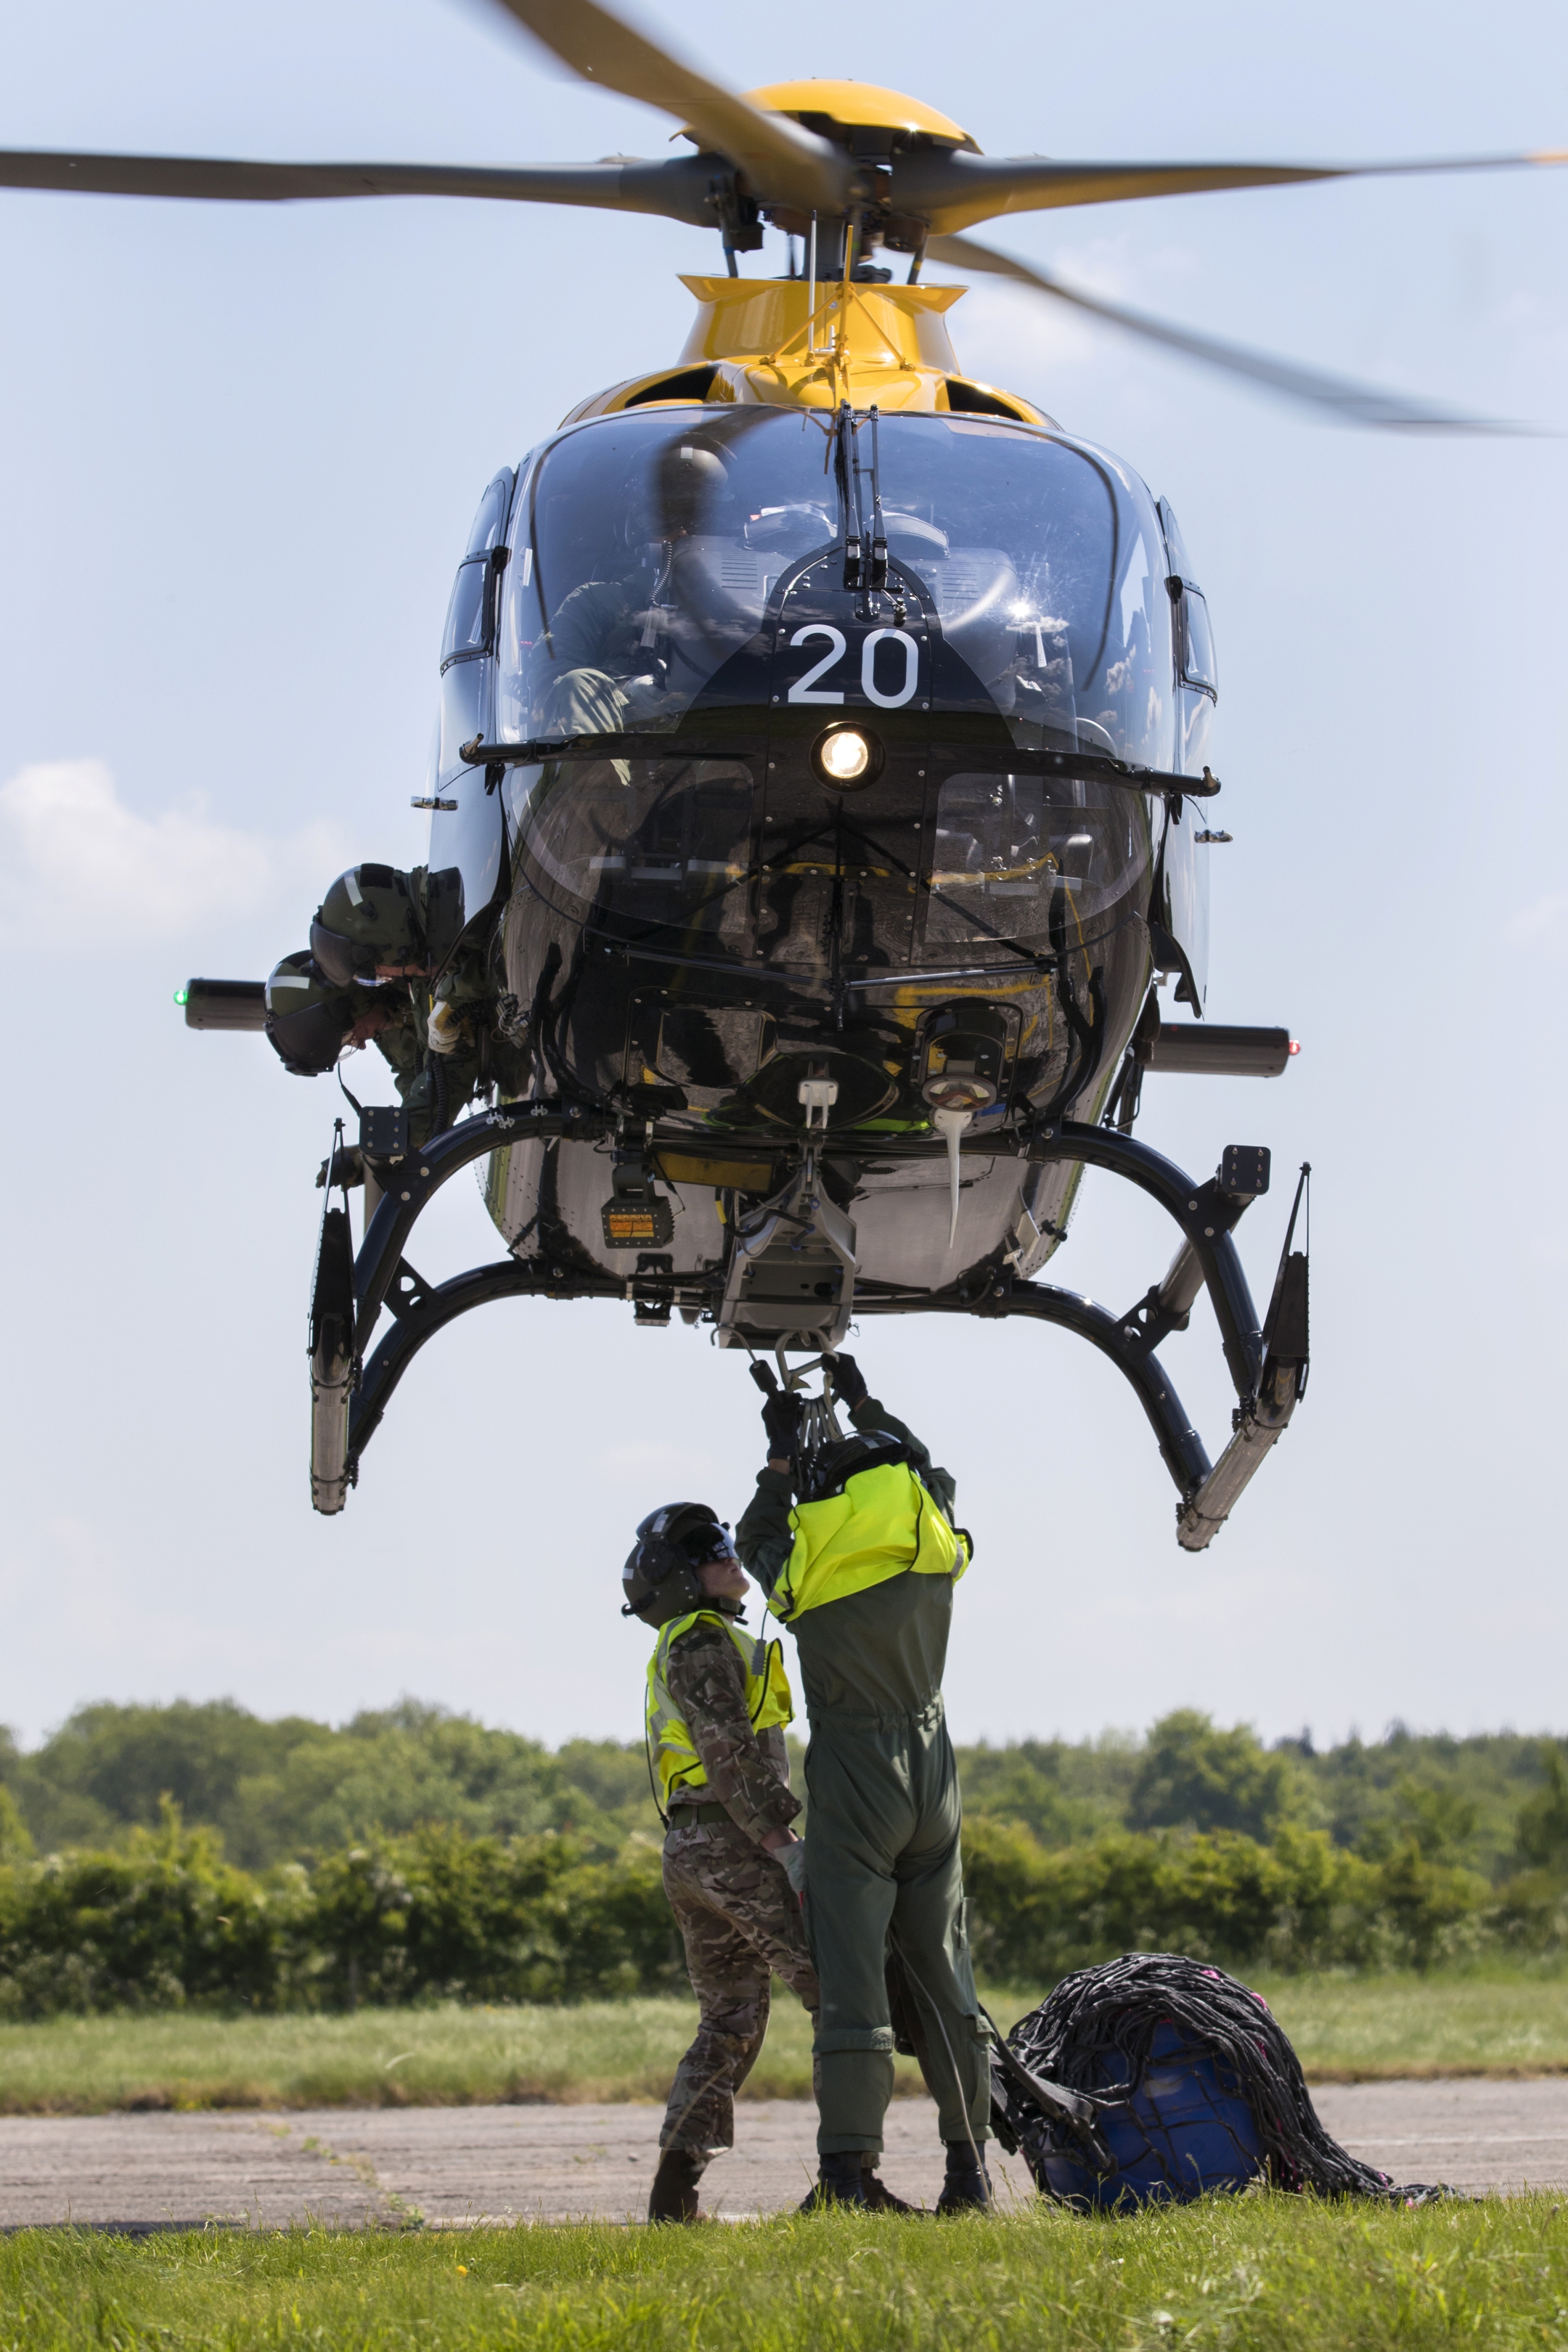 Personnel attaching an Under Slung Load to a Juno helicopter.